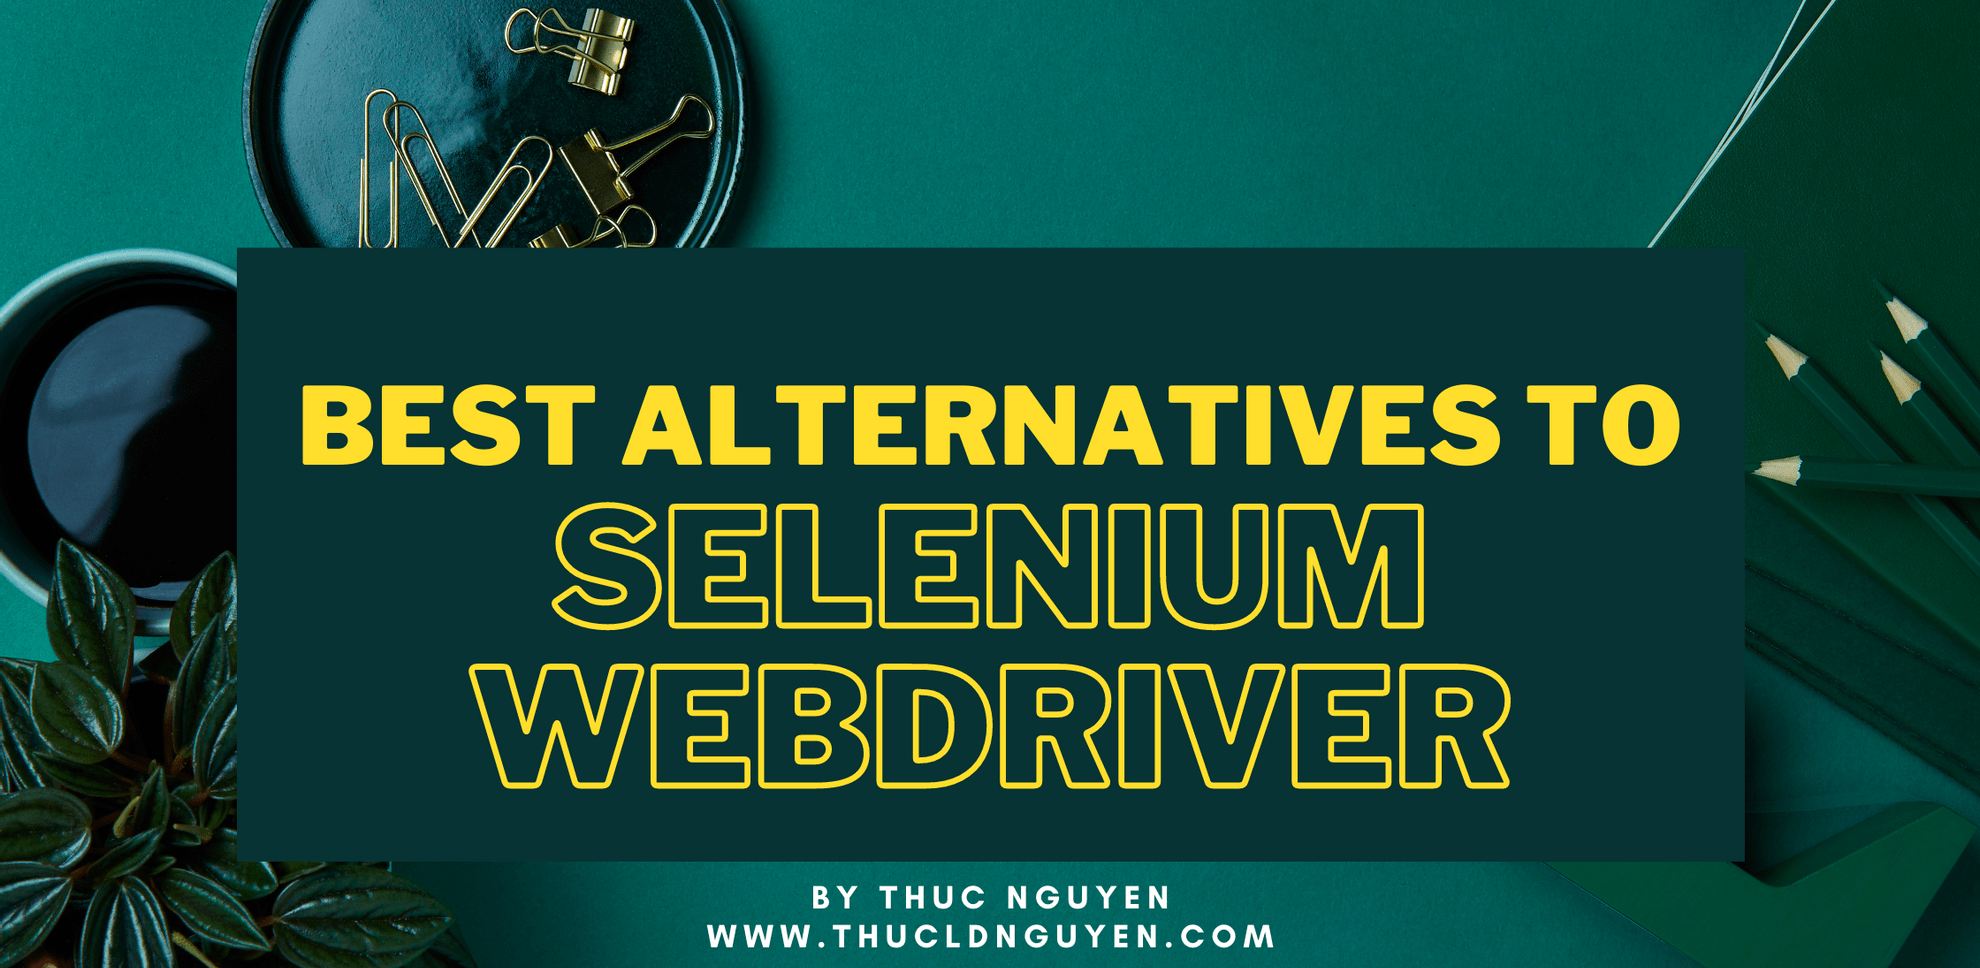 Best Alternatives to Selenium WebDriver for Web Testing - Featured image